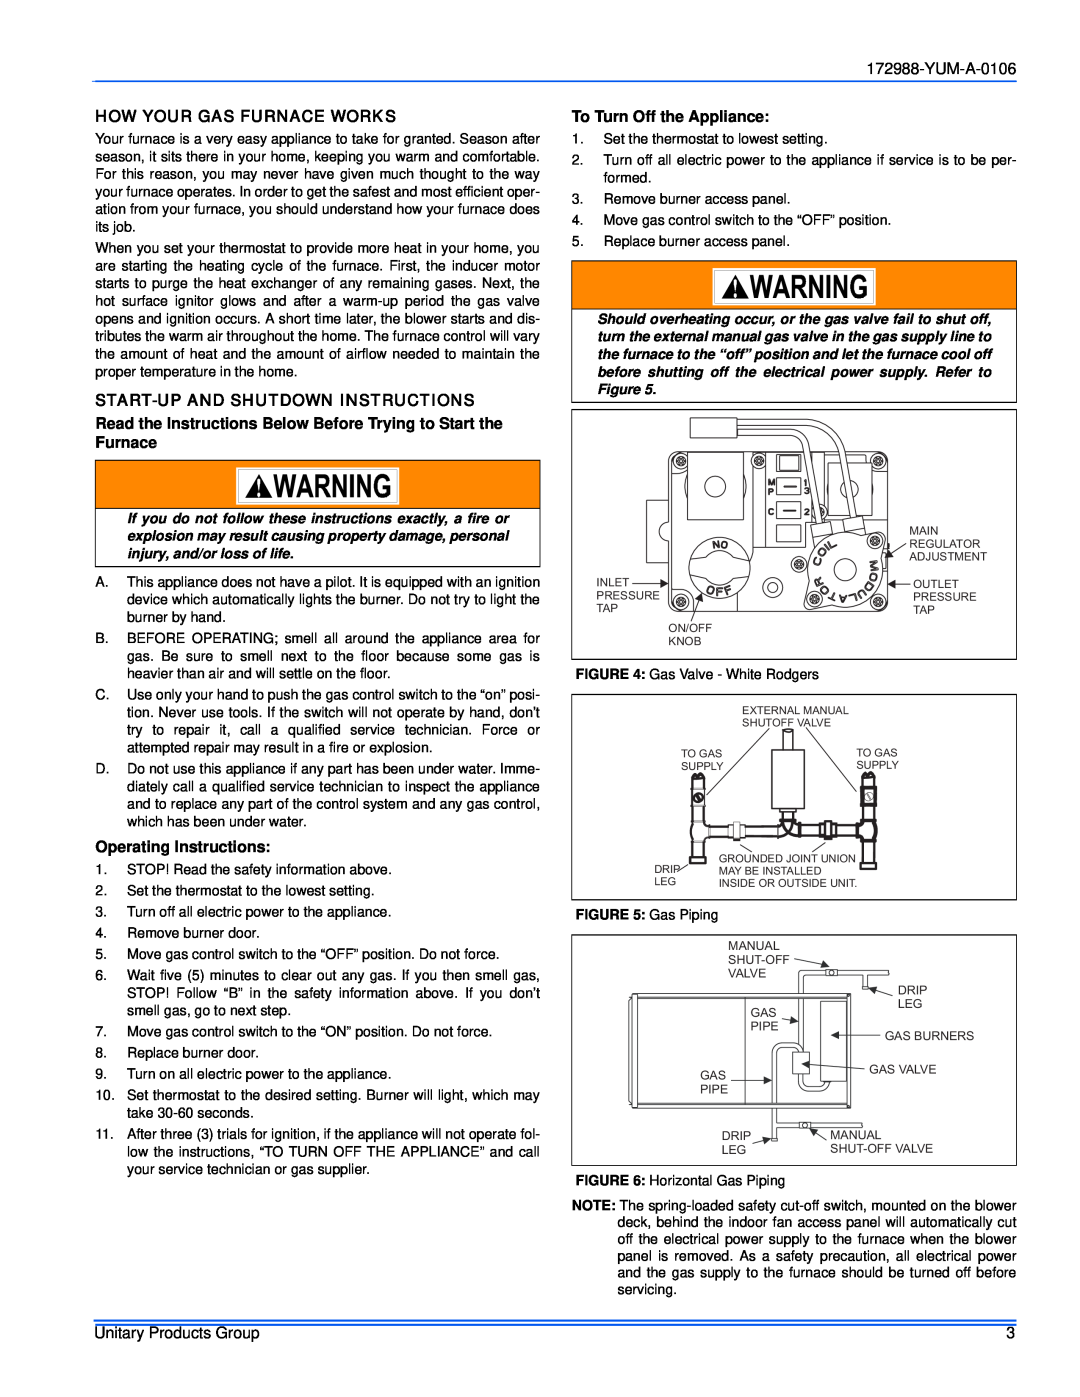 York PC9 service manual YUM-A-0106, How Your Gas Furnace Works, Start-Upand Shutdown Instructions, Operating Instructions 